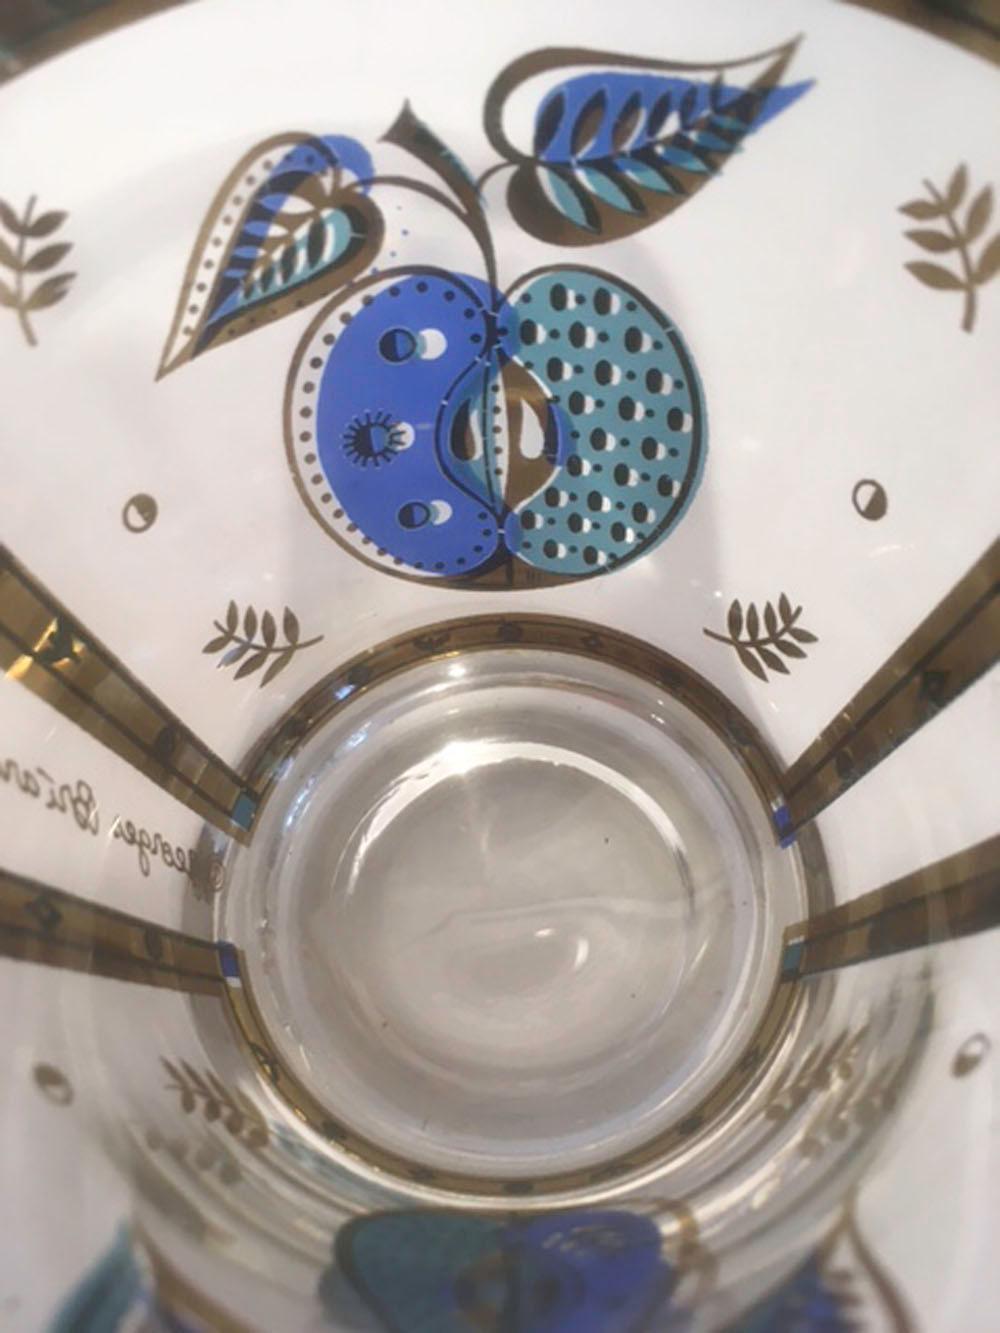 Enameled Vintage Old Fashioned Glasses by Georges Briard in the Forbidden Fruit Pattern